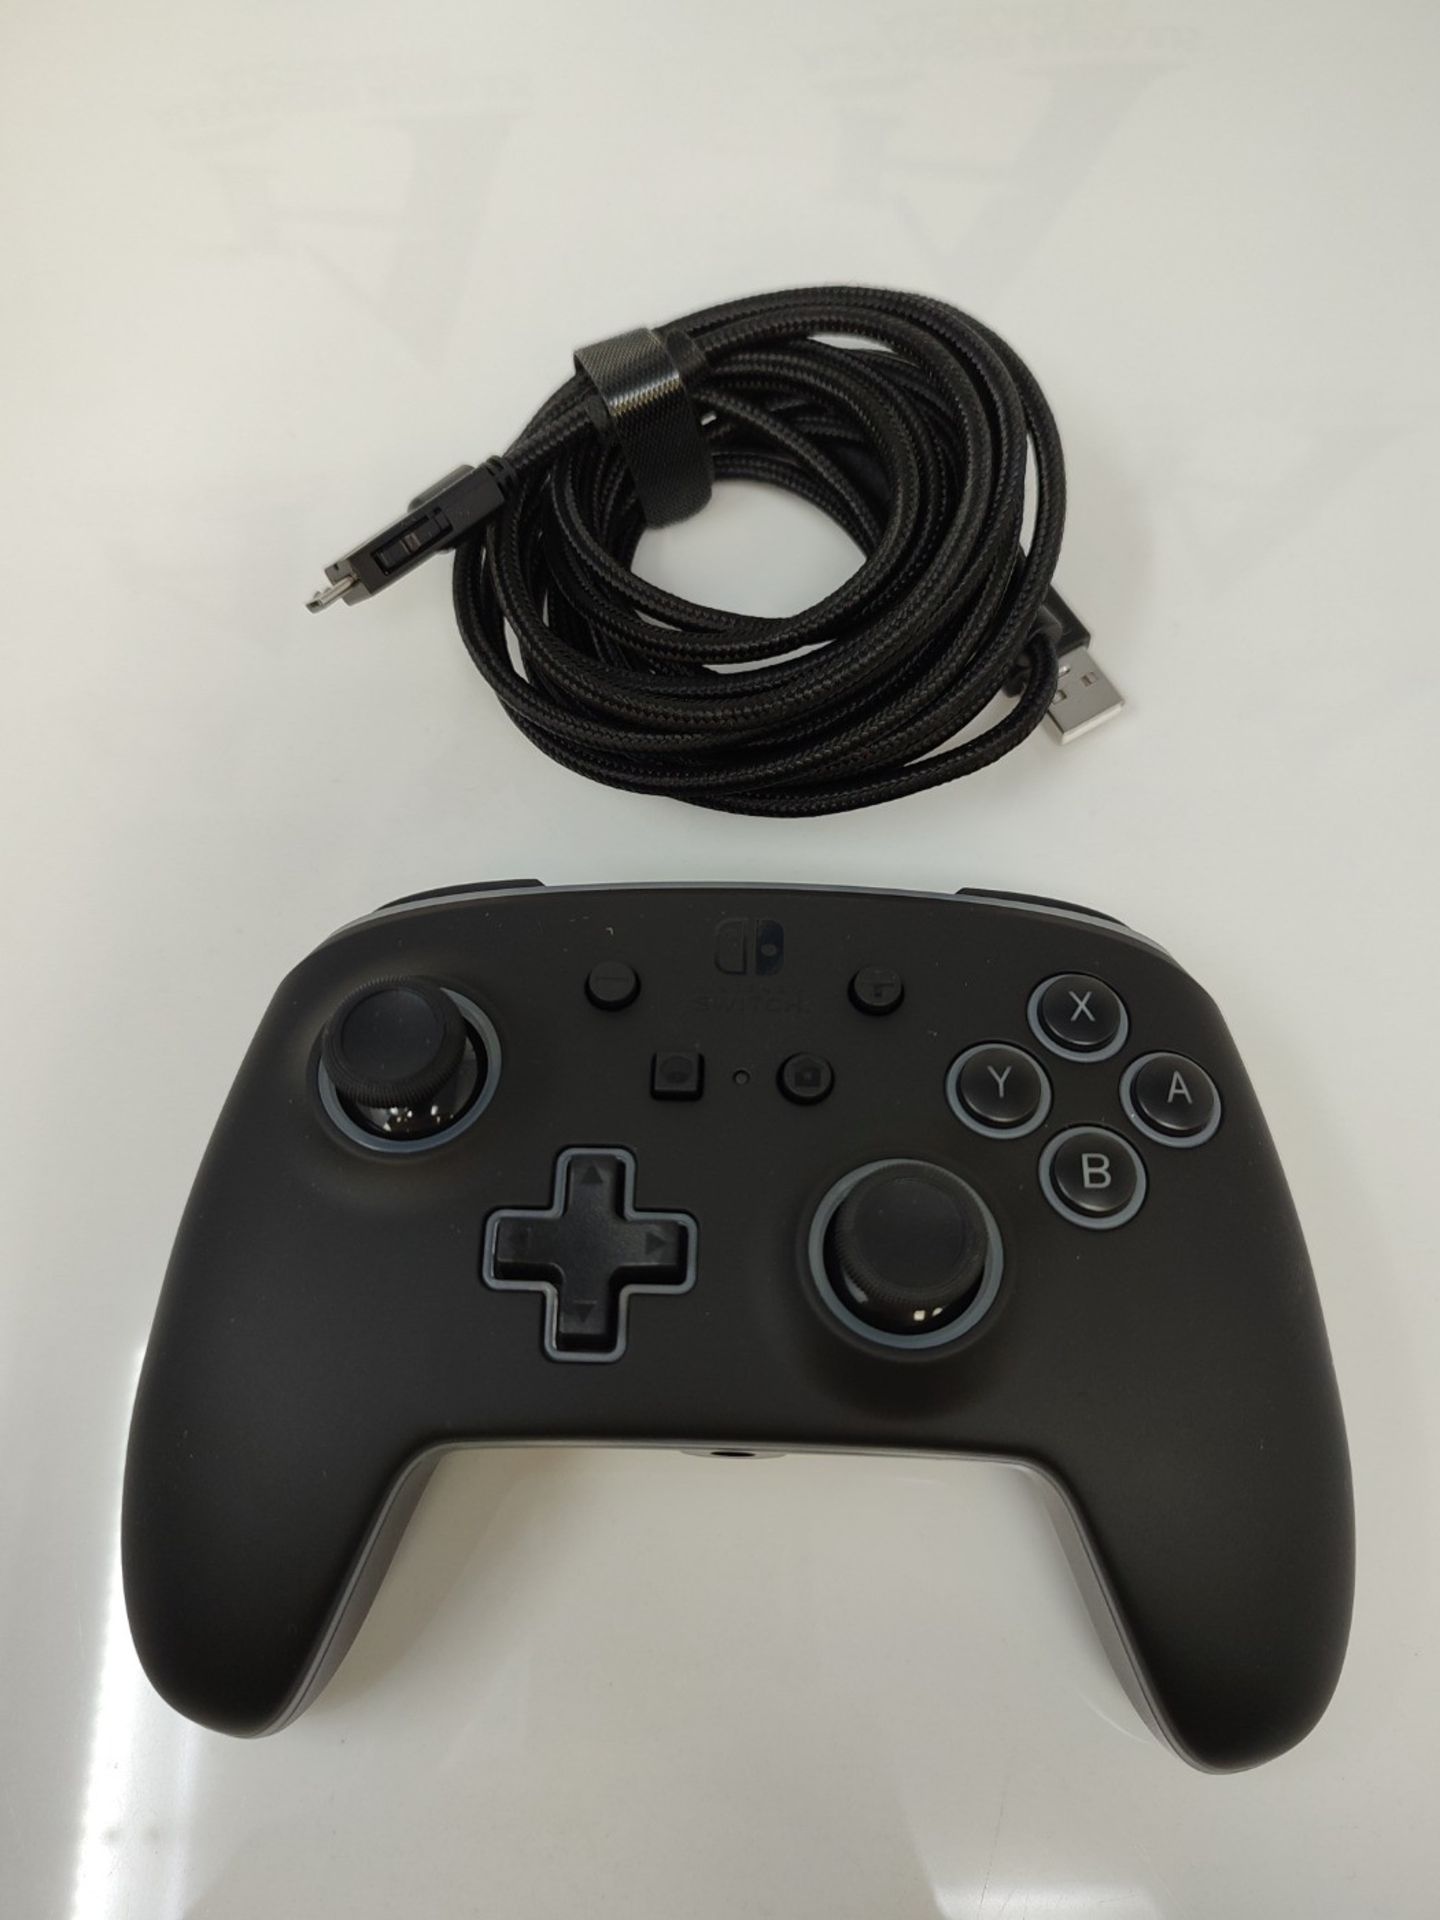 PowerA Advanced Wired Controller Spectra for Nintendo Switch - Nintendo Switch - Image 3 of 6